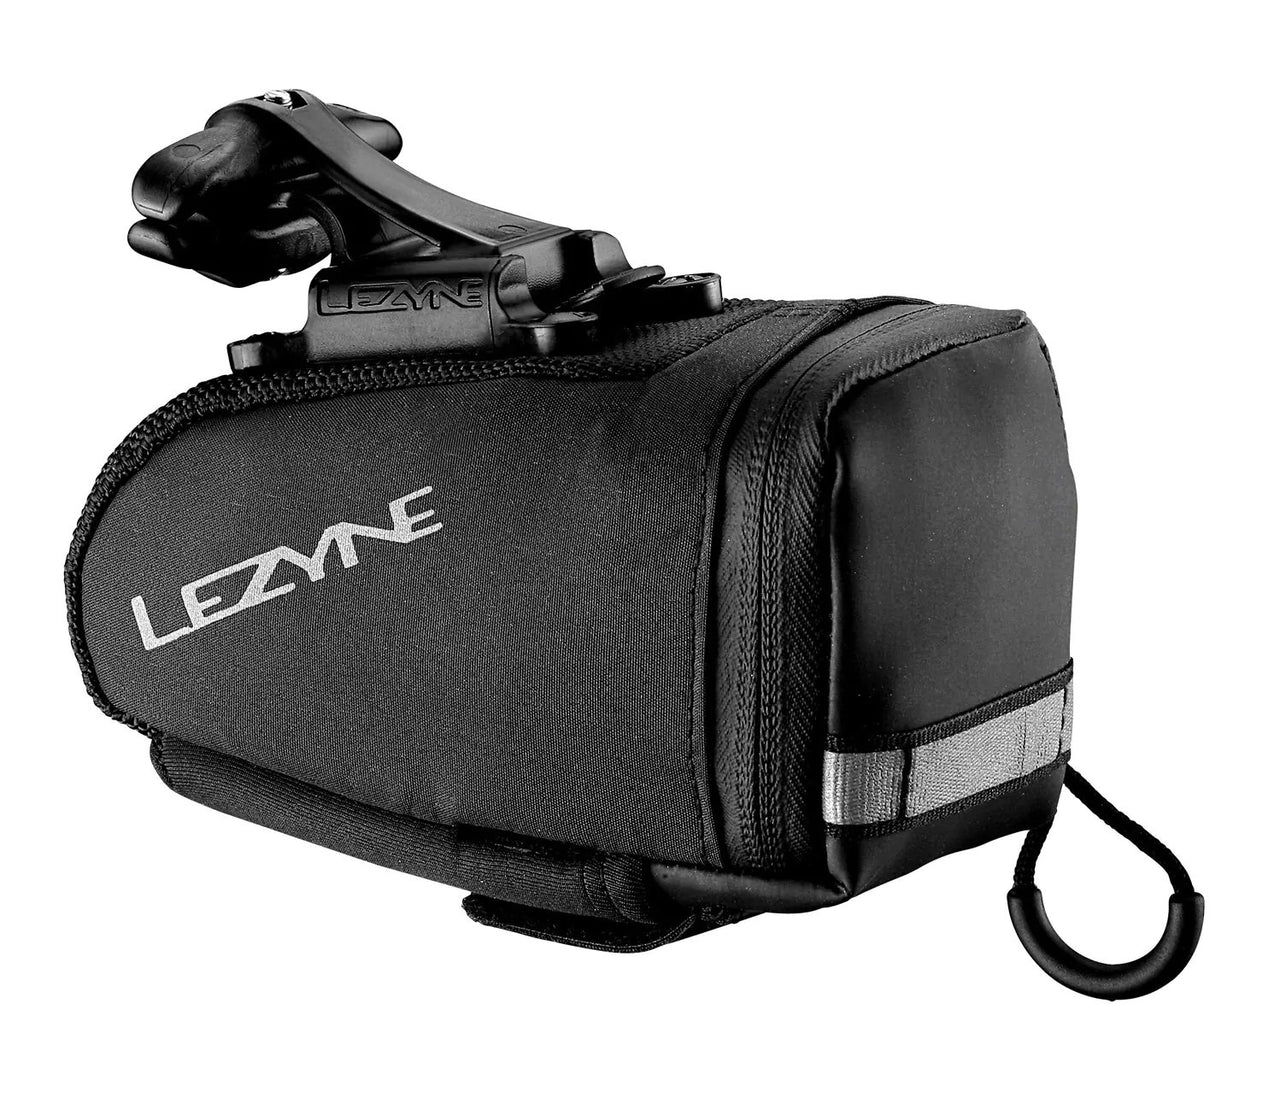 Lezyne M Cady Quick Release